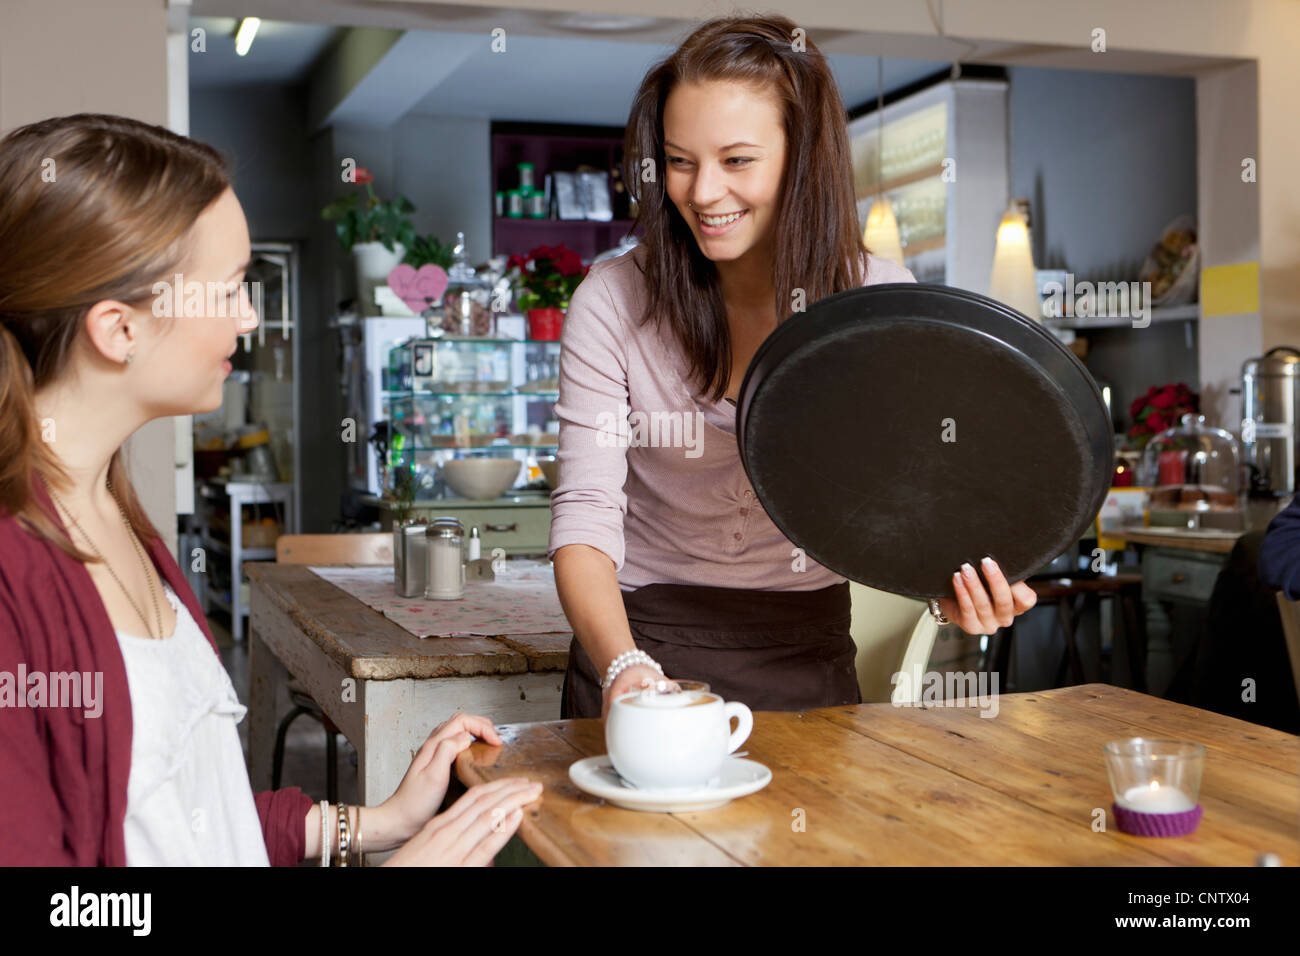 Waitress serving woman in cafe Stock Photo